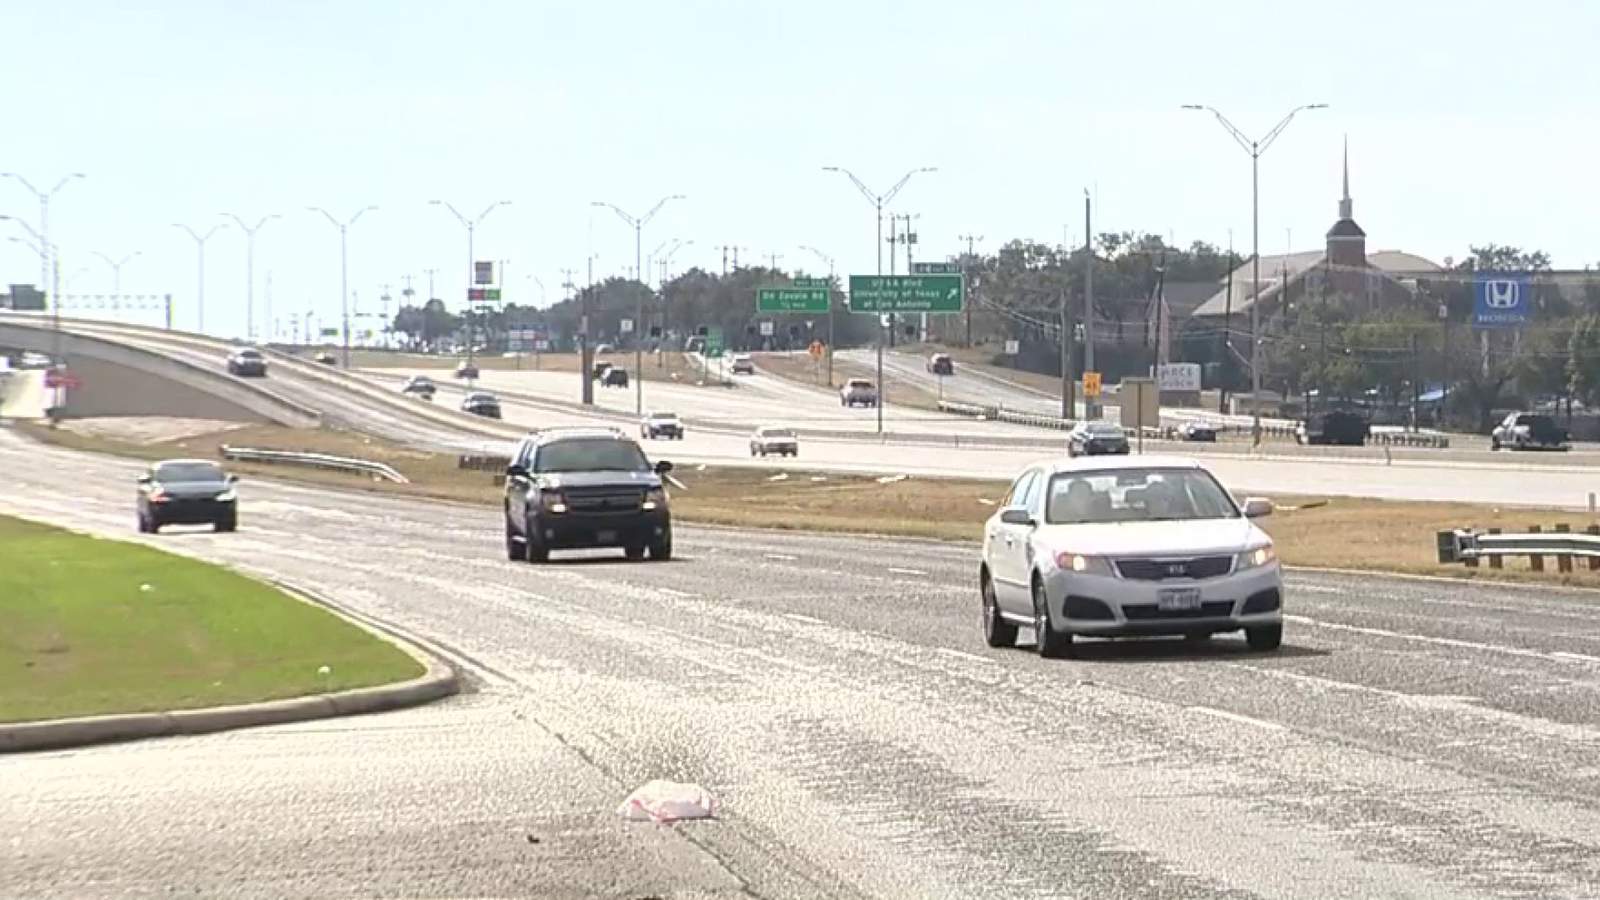 TxDOT: All interchanges, roadways closed during winter storm in San Antonio are now open